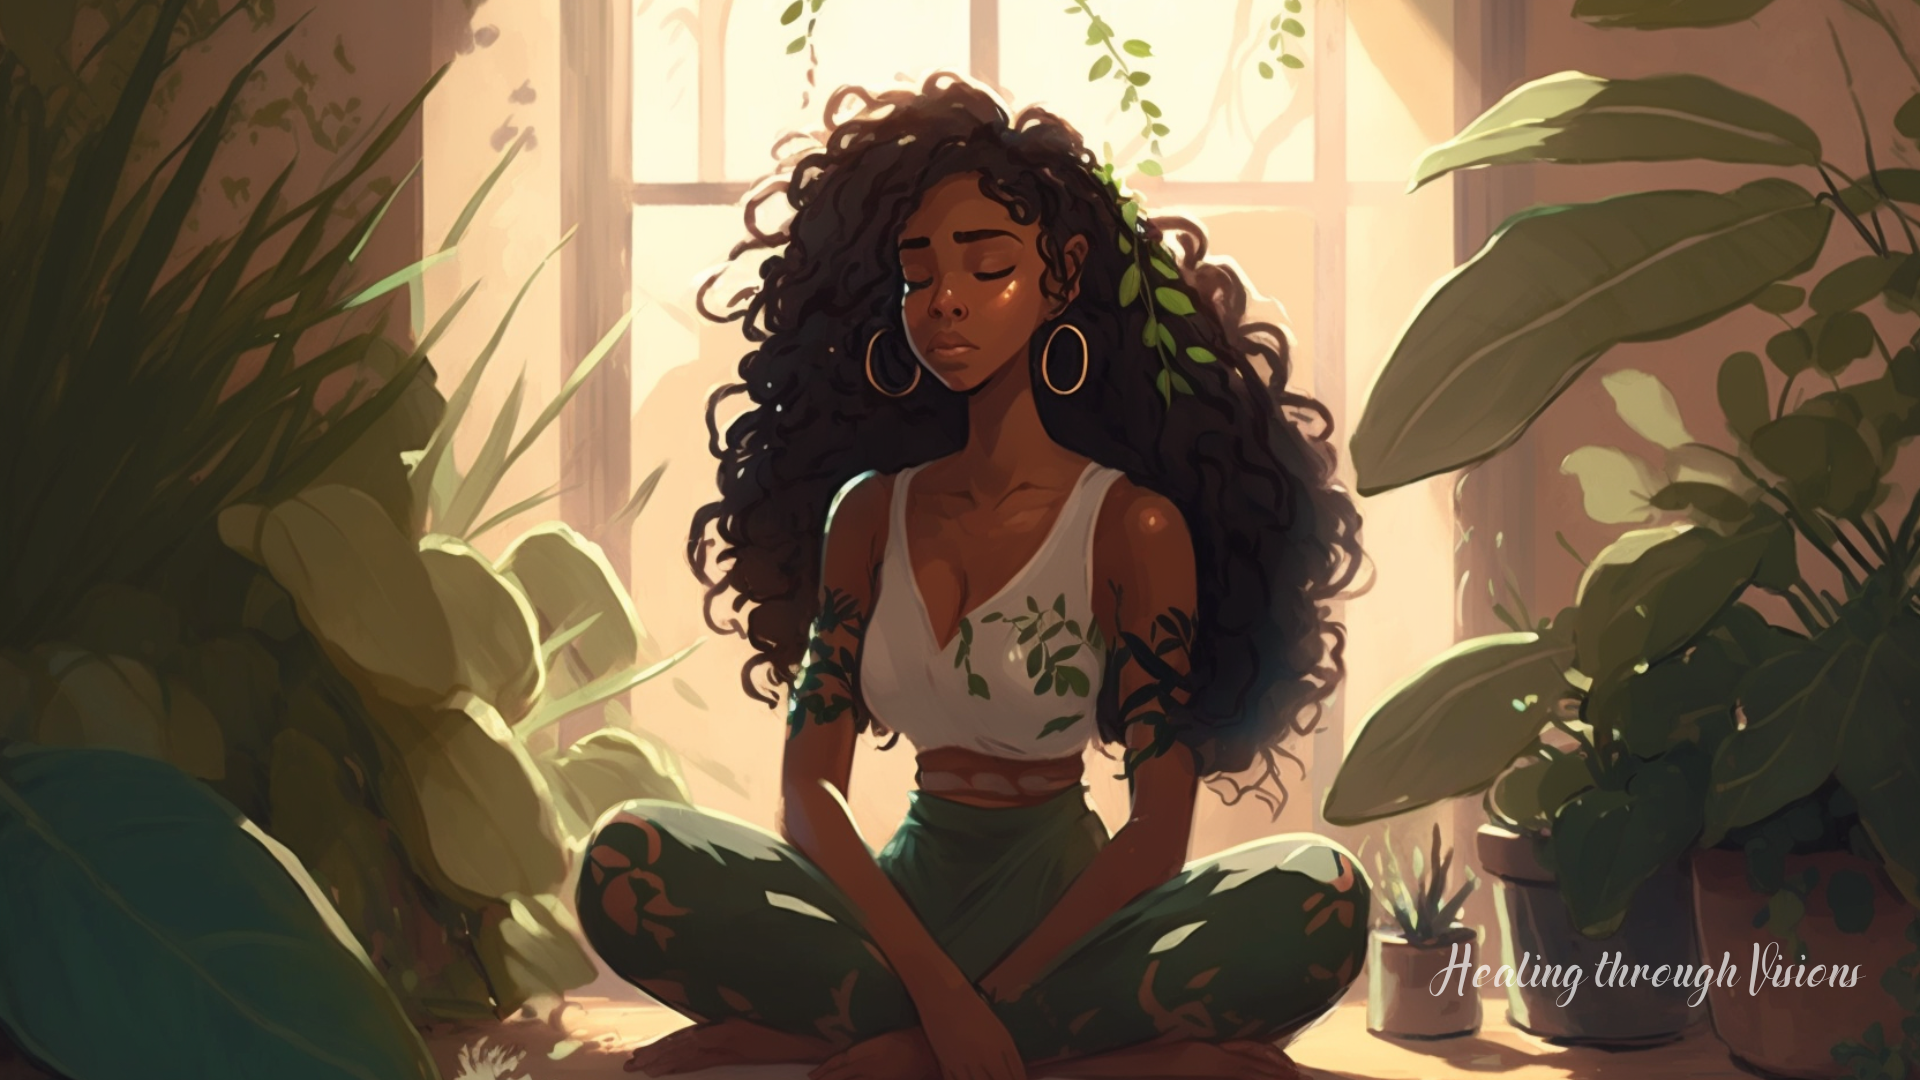 A young Black woman sits cross-legged on the floor, her long locs cascading down her back in thick waves. Her nose piercing glints in the soft light of the room, and her eyes are closed as she meditates amidst the lush greenery of the jade plants surrounding her. The glossy leaves of the plants shimmer in the gentle breeze, casting shadows on her face and creating a magical aura around her. The woman's skin glows with an inner radiance, and it's clear that she is at peace and in harmony with the natural world around her. As she meditates, she channels the energies of the plants, calling upon their association with prosperity, wealth, and fortune to manifest abundance and success in her life.